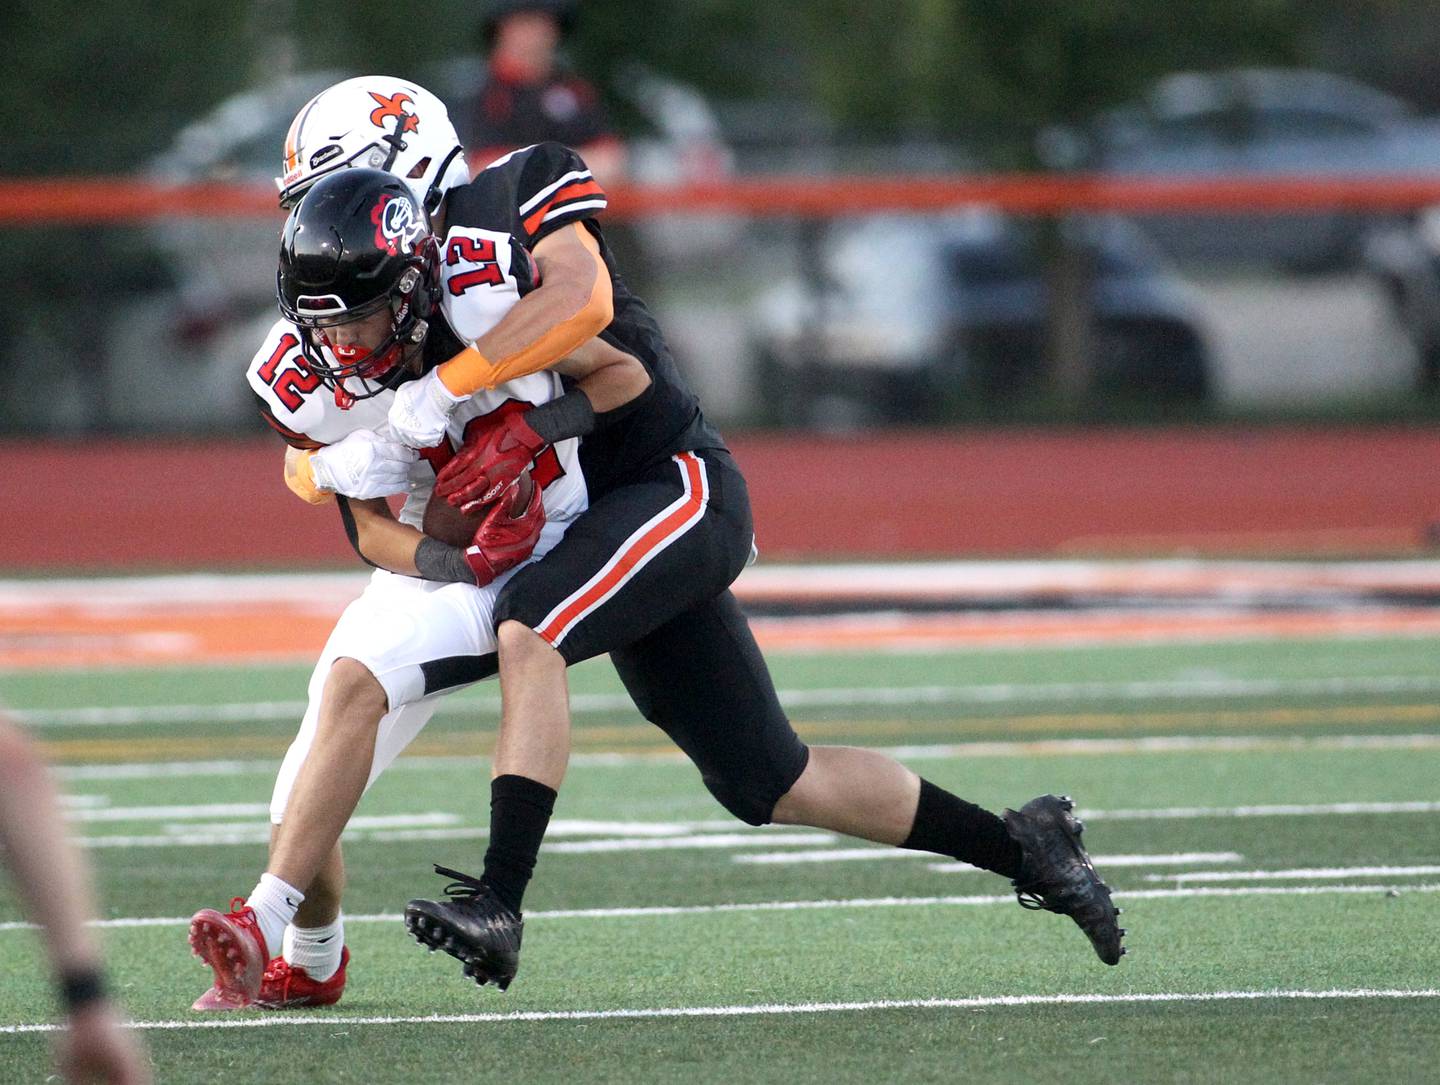 Lincoln-Way Central’s Ryan Schissler (12) is taken down by a St. Charles East defender during the season opener at St. Charles East on Friday, Aug. 26, 2022.